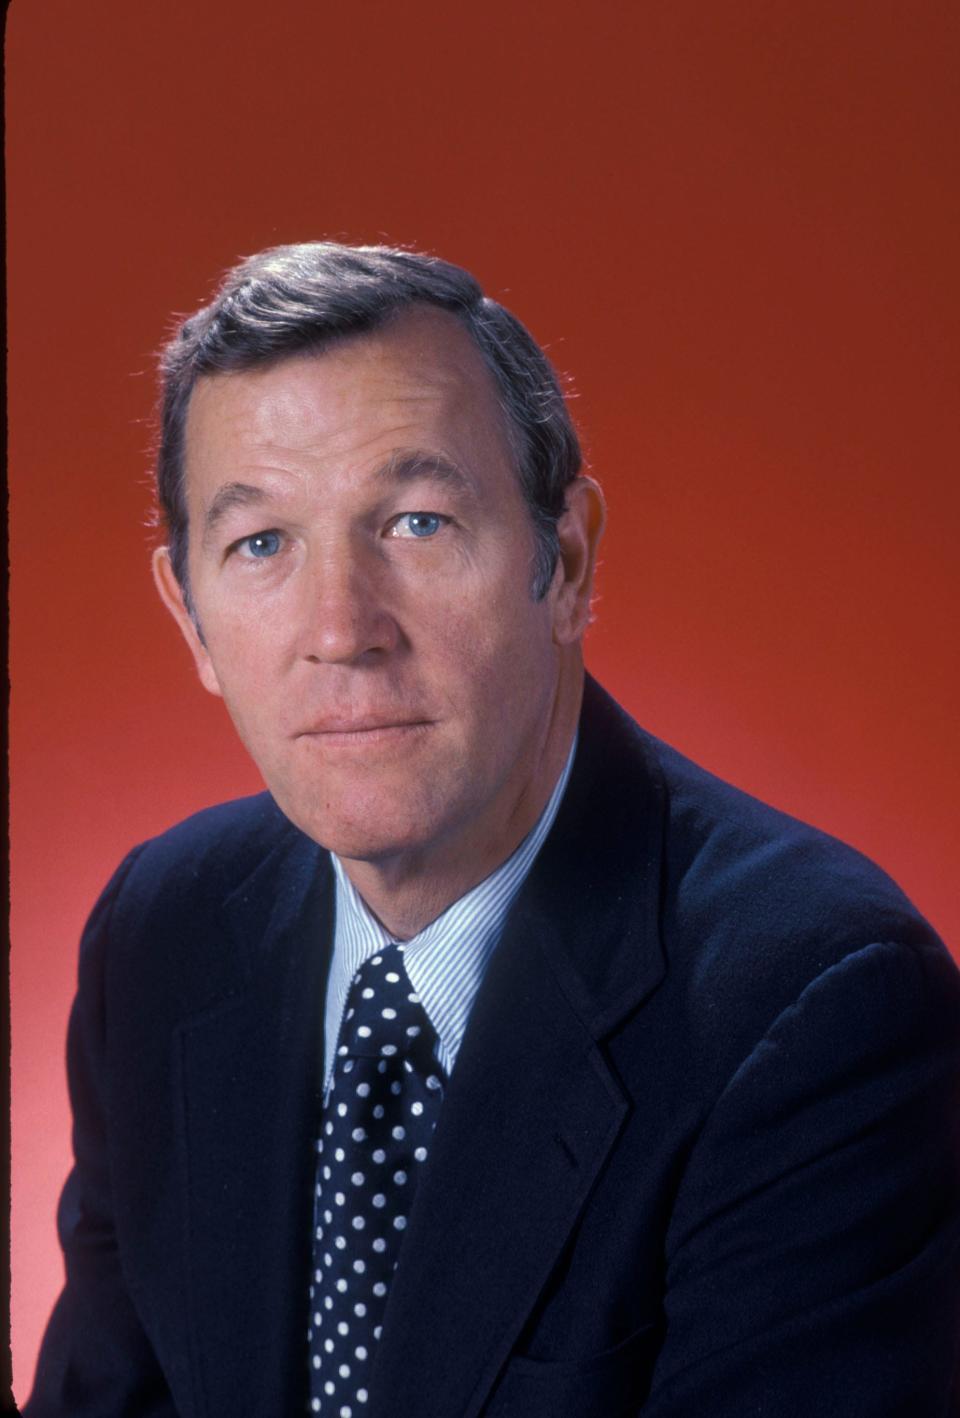 Roger Mudd in an undated photo from his career at CBS. The broadcaster died on March 9 at his home in McLean, Virginia.